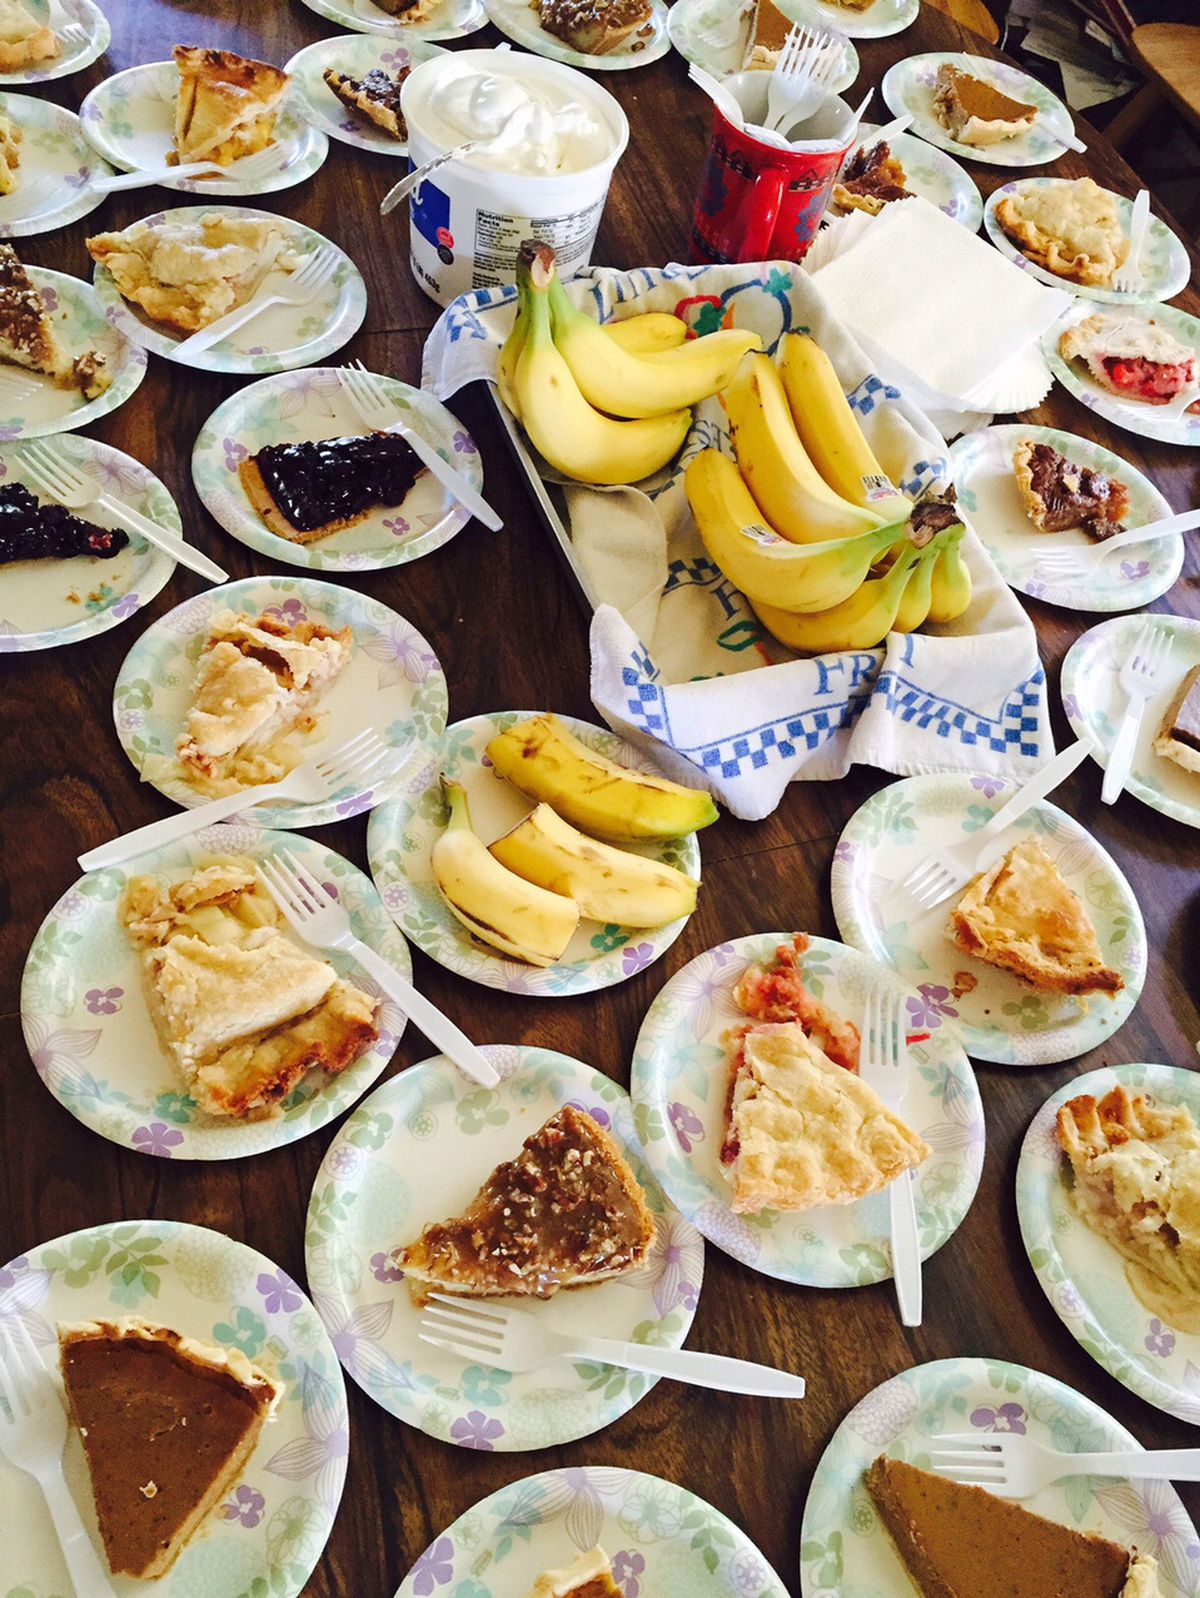 The pie station is one part of Scenic Tour of Kootenai River that could have you up early.